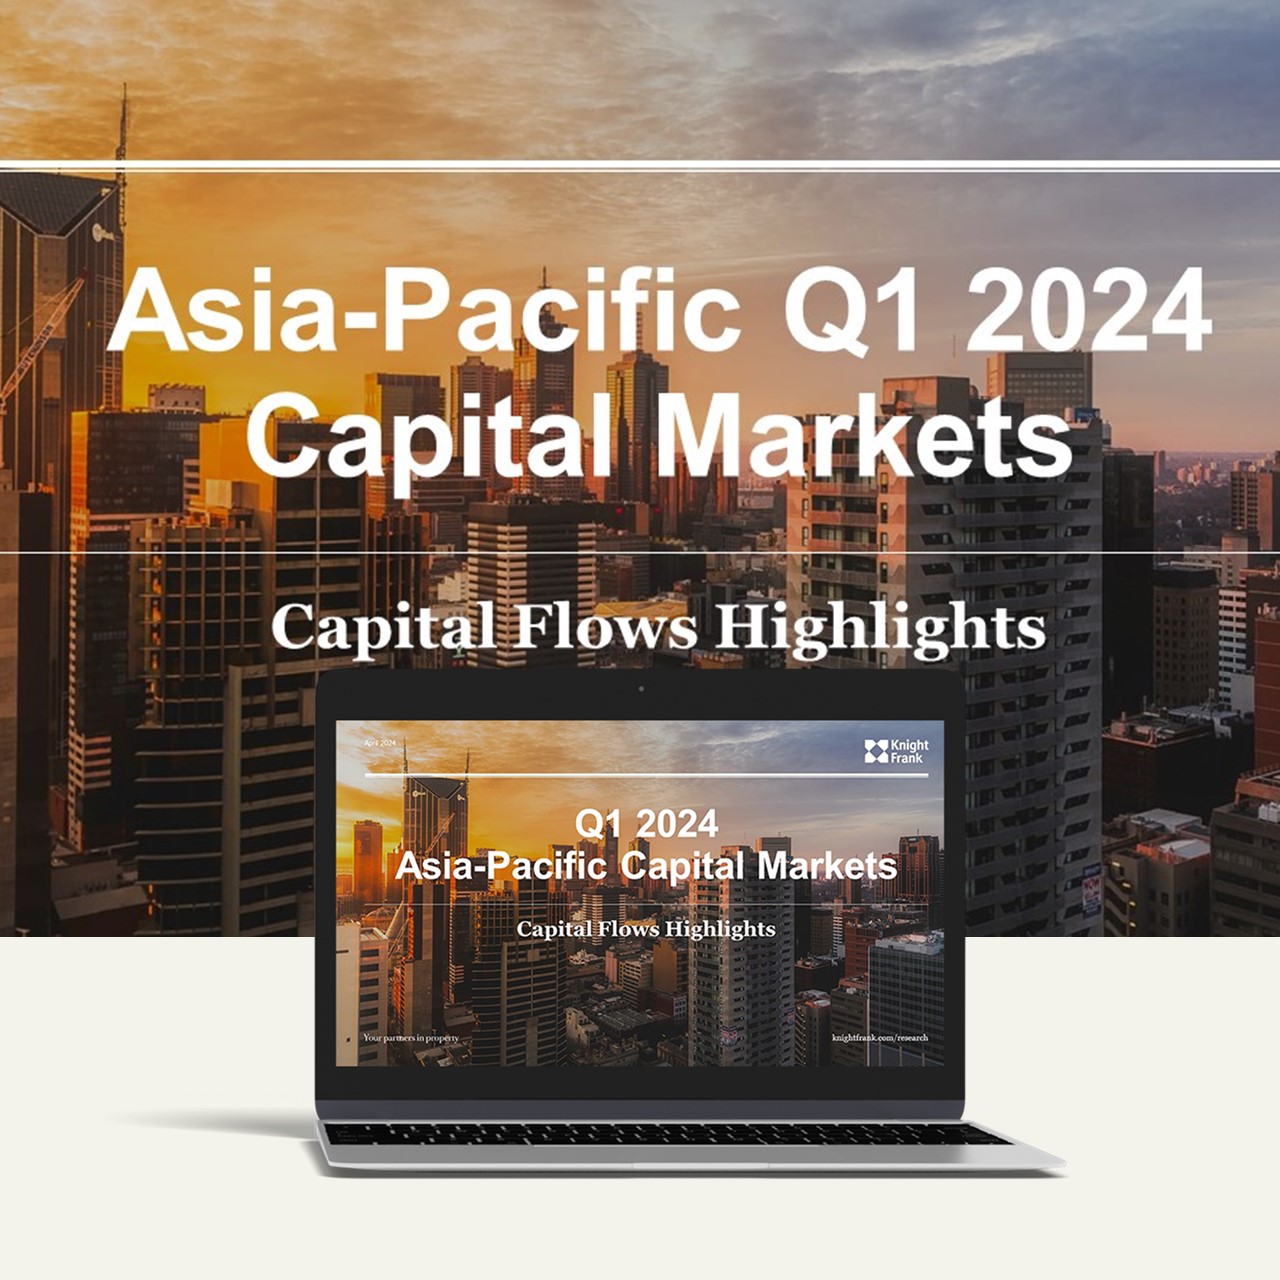 Knight Frank Asia-Pacific Q1 2024 Capital Flow Highlight 